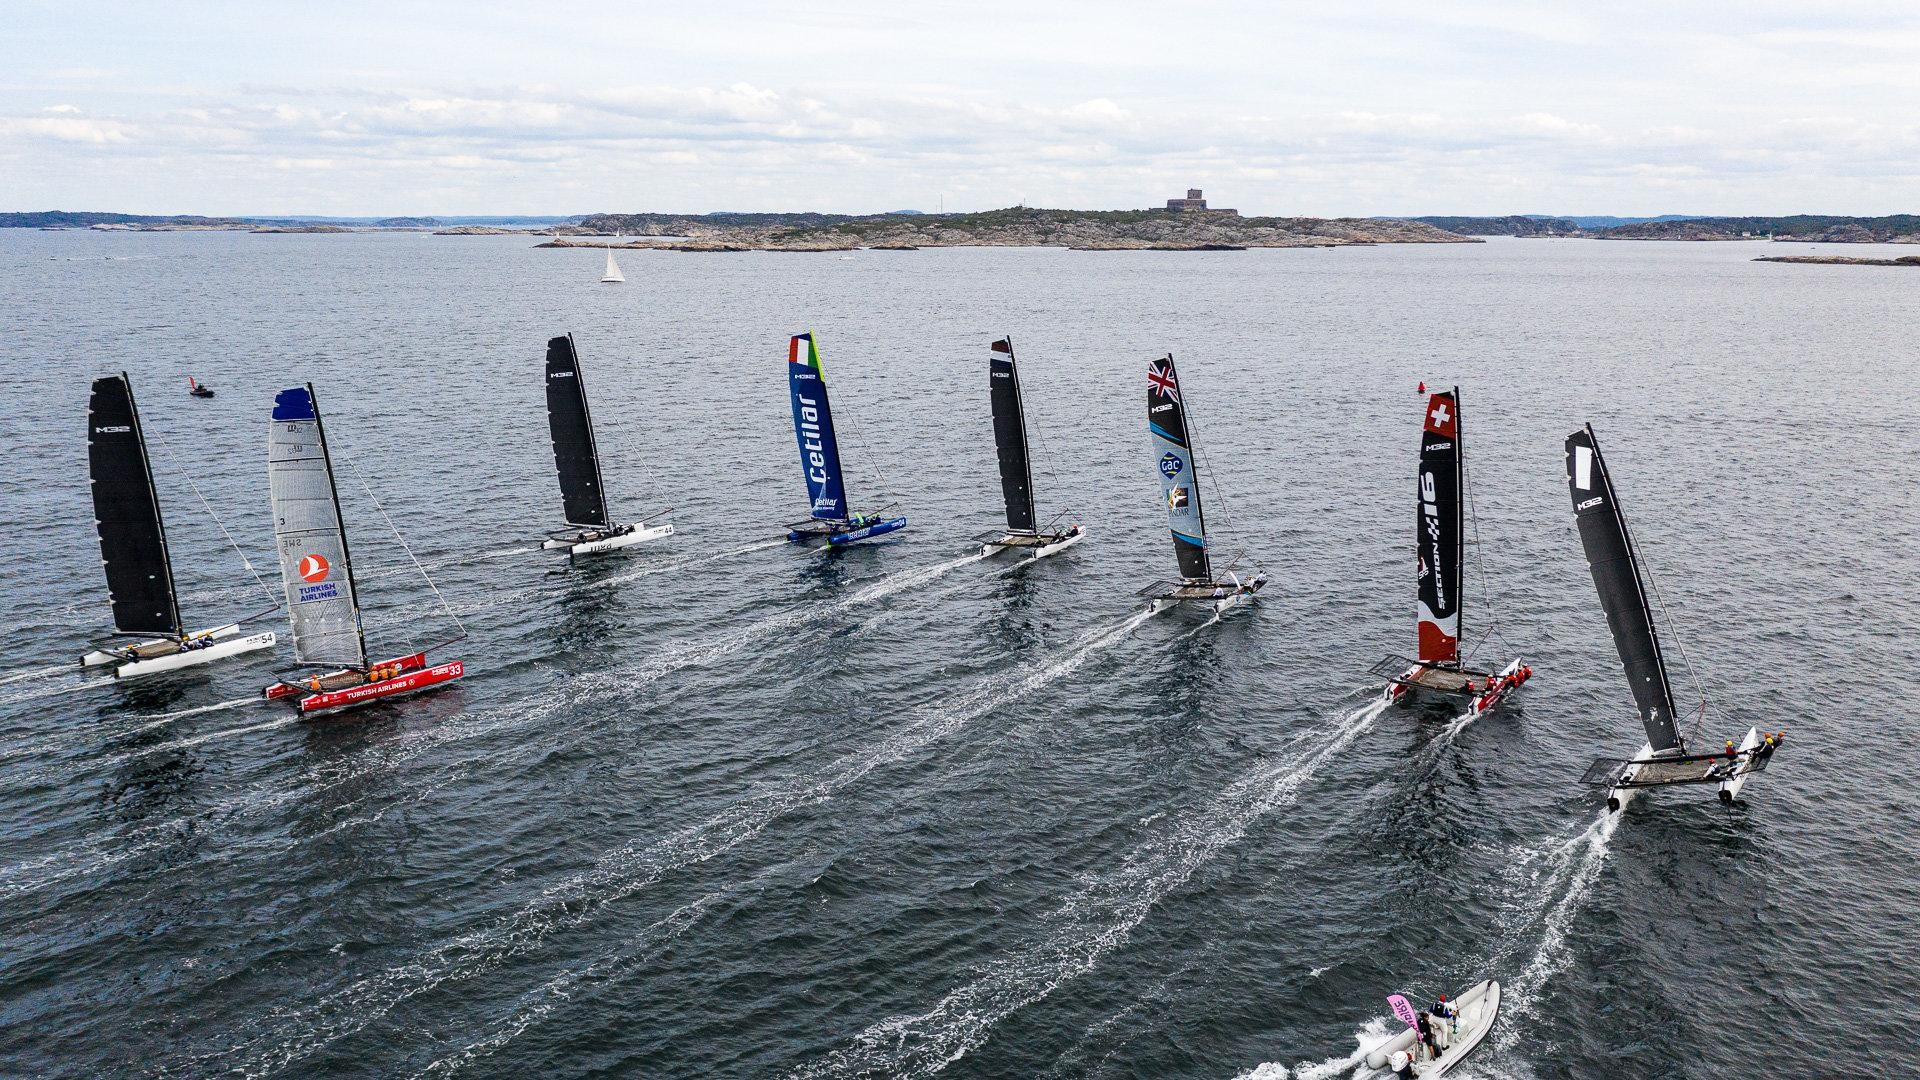 New teams get a look in on day two of M32 European Series Marstrand